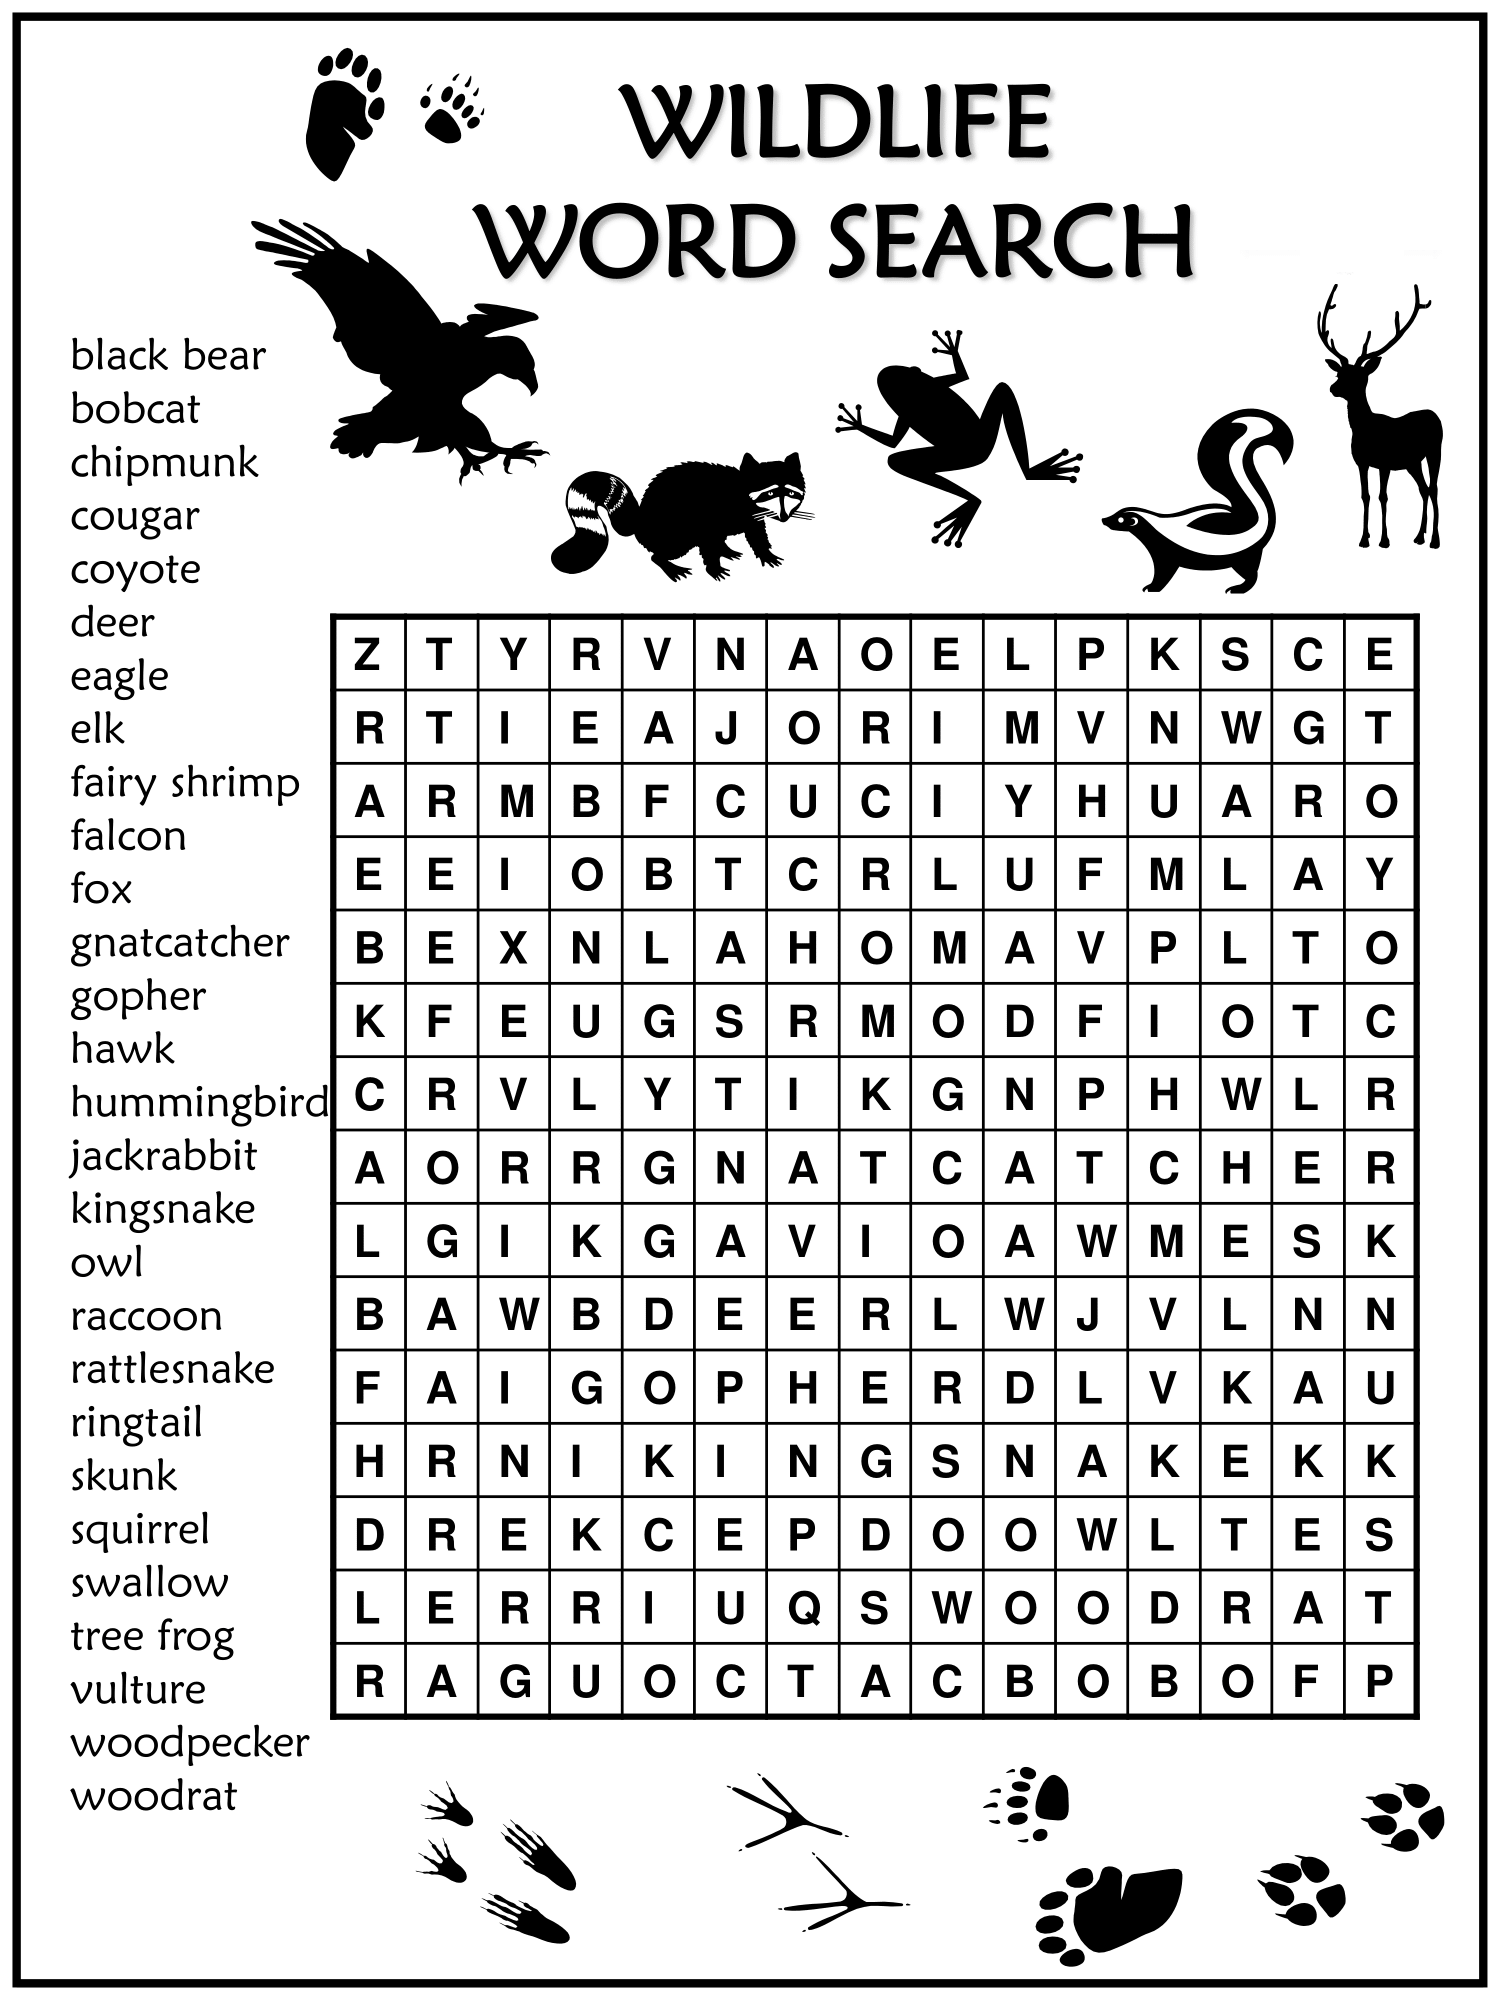 geography-blog-wildlife-word-search